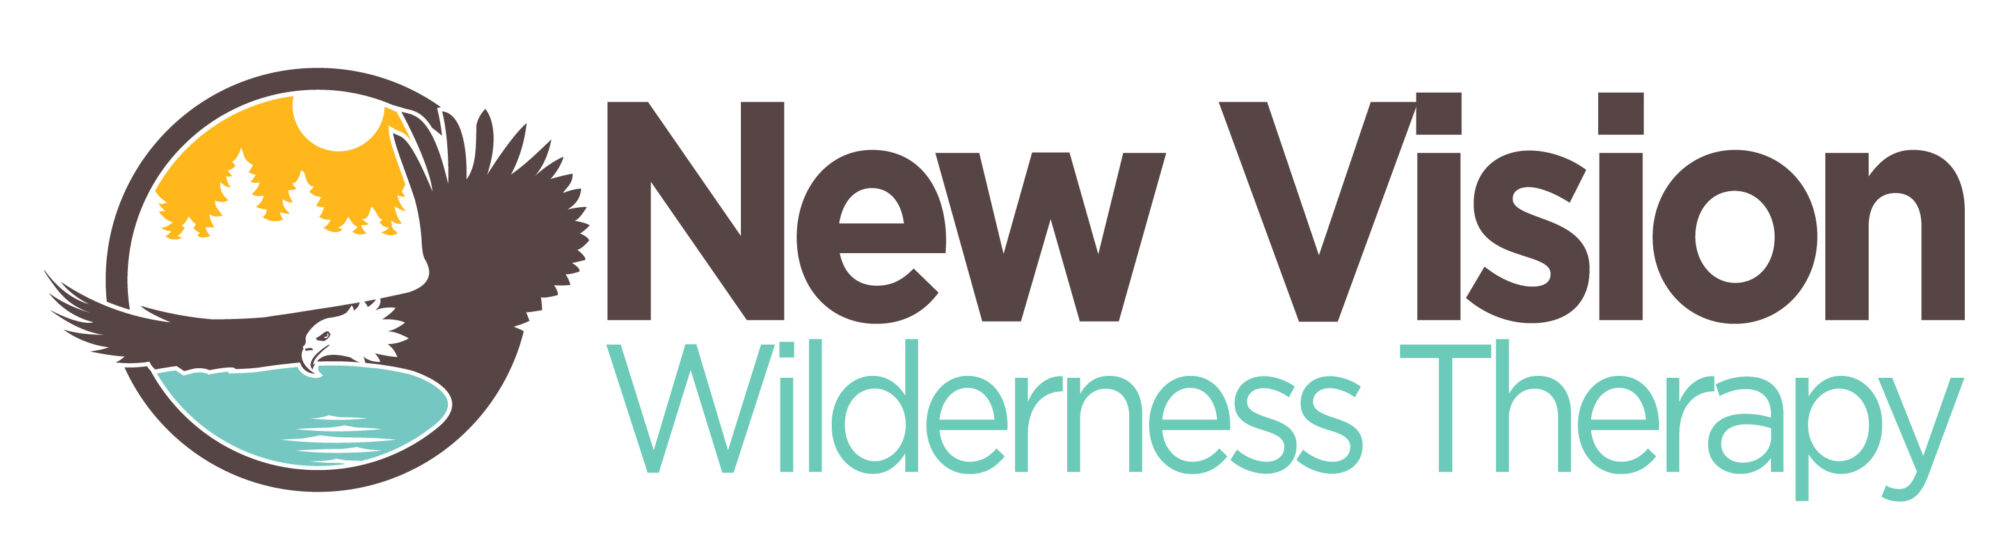 New Vision Wilderness therapy Logo